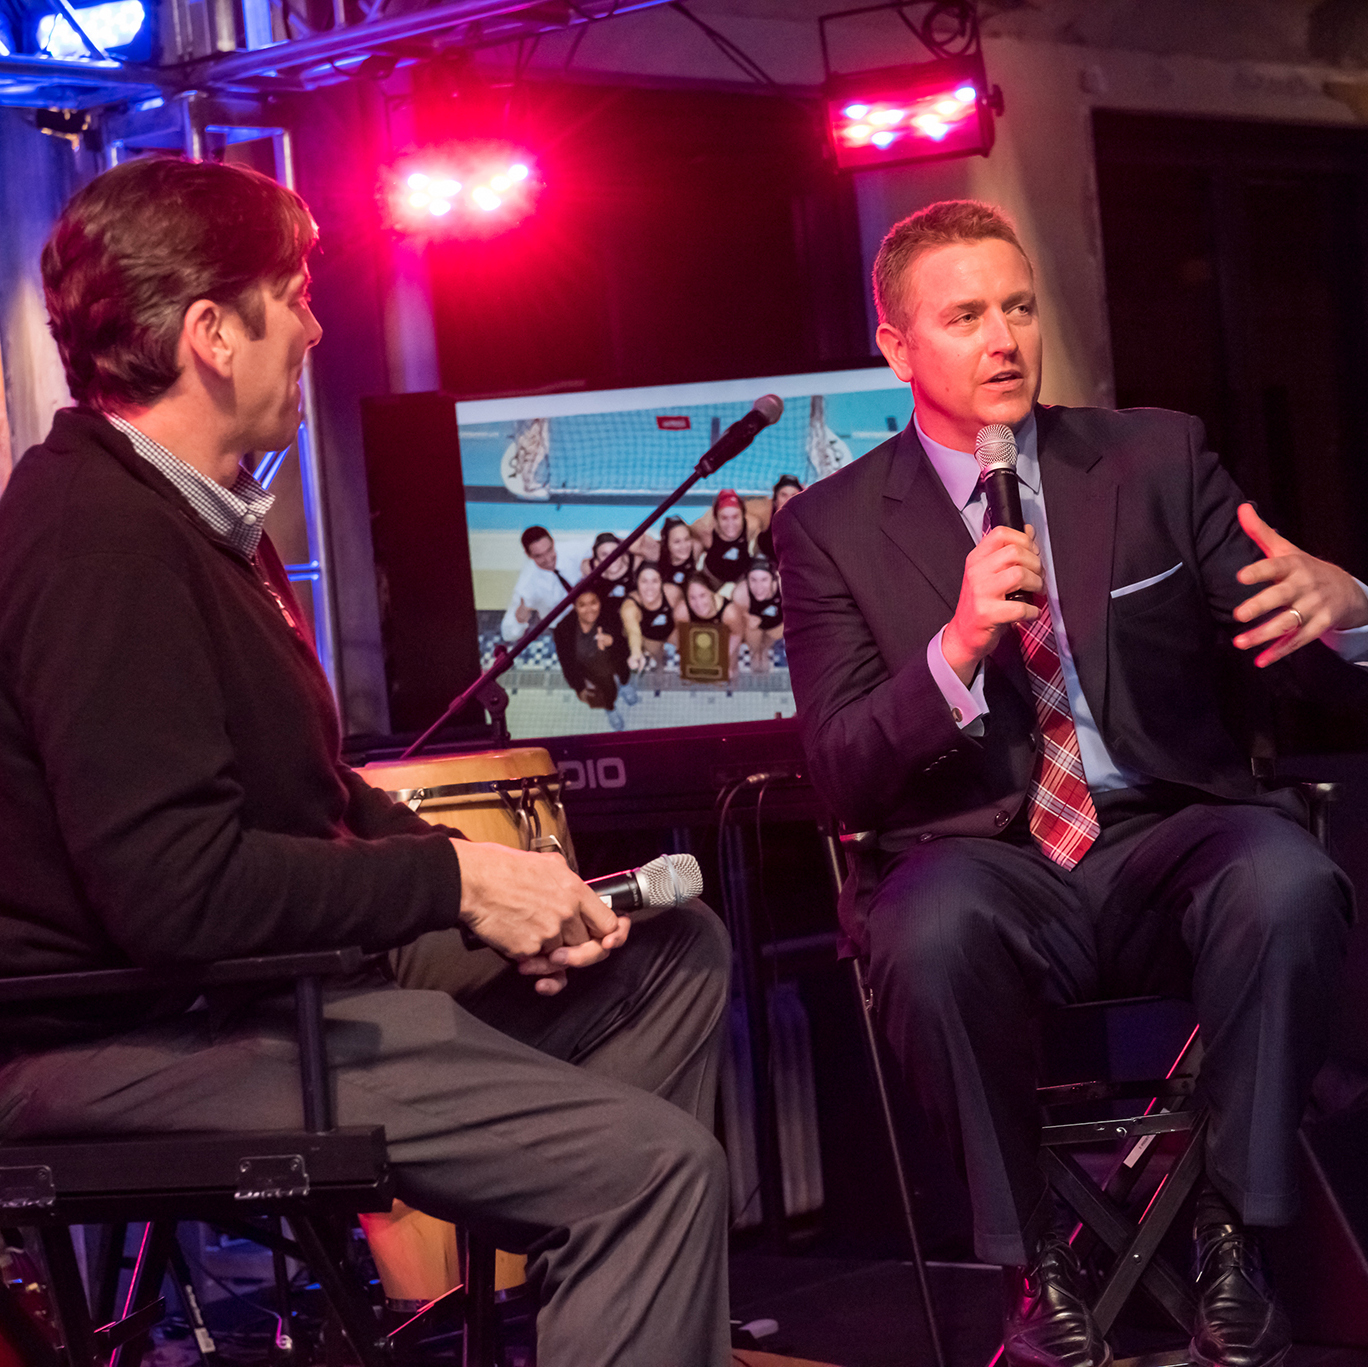 ESPN analyst Kirk Herbstreit (right) and AOL CEO Tim Armstrong '93 helped launch the Camel Athletics Club at the AOL Headquarters in New York City.